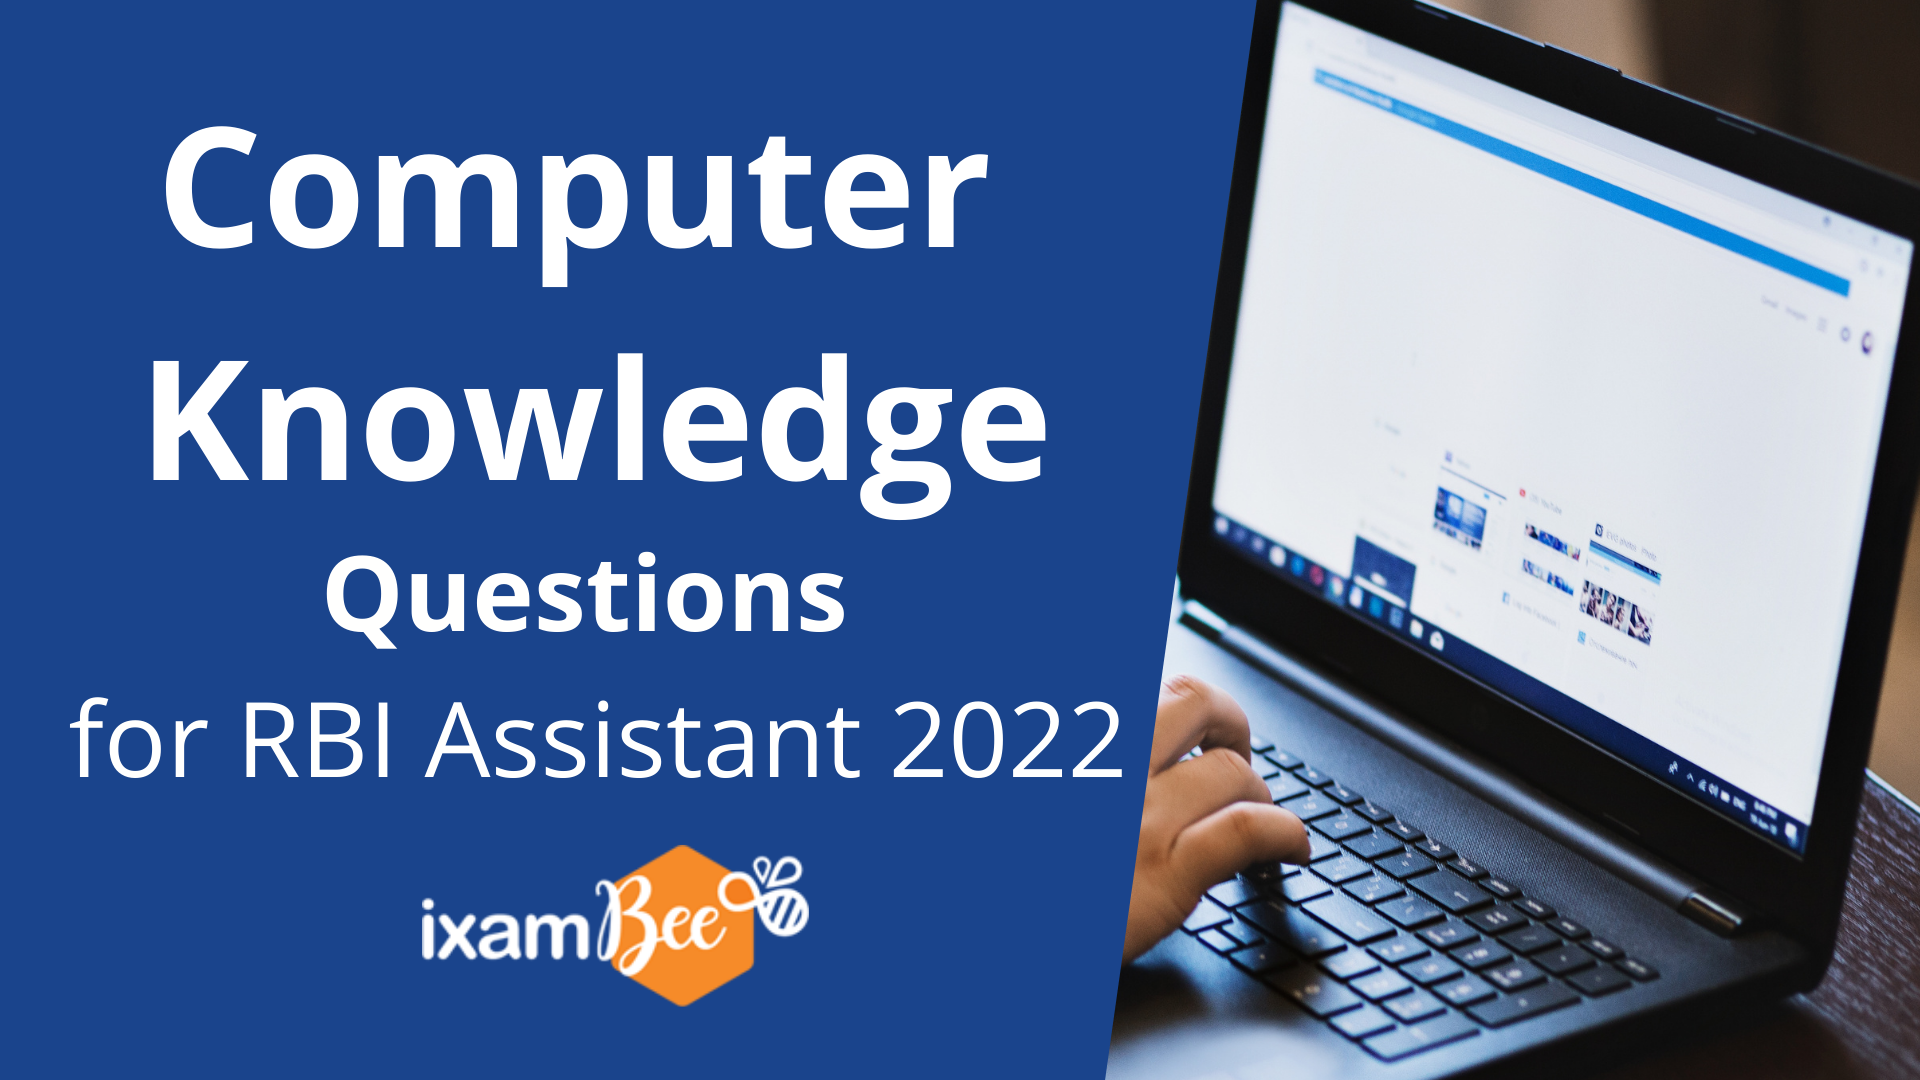 Computer Knowledge Questions for RBI Assistant 2022